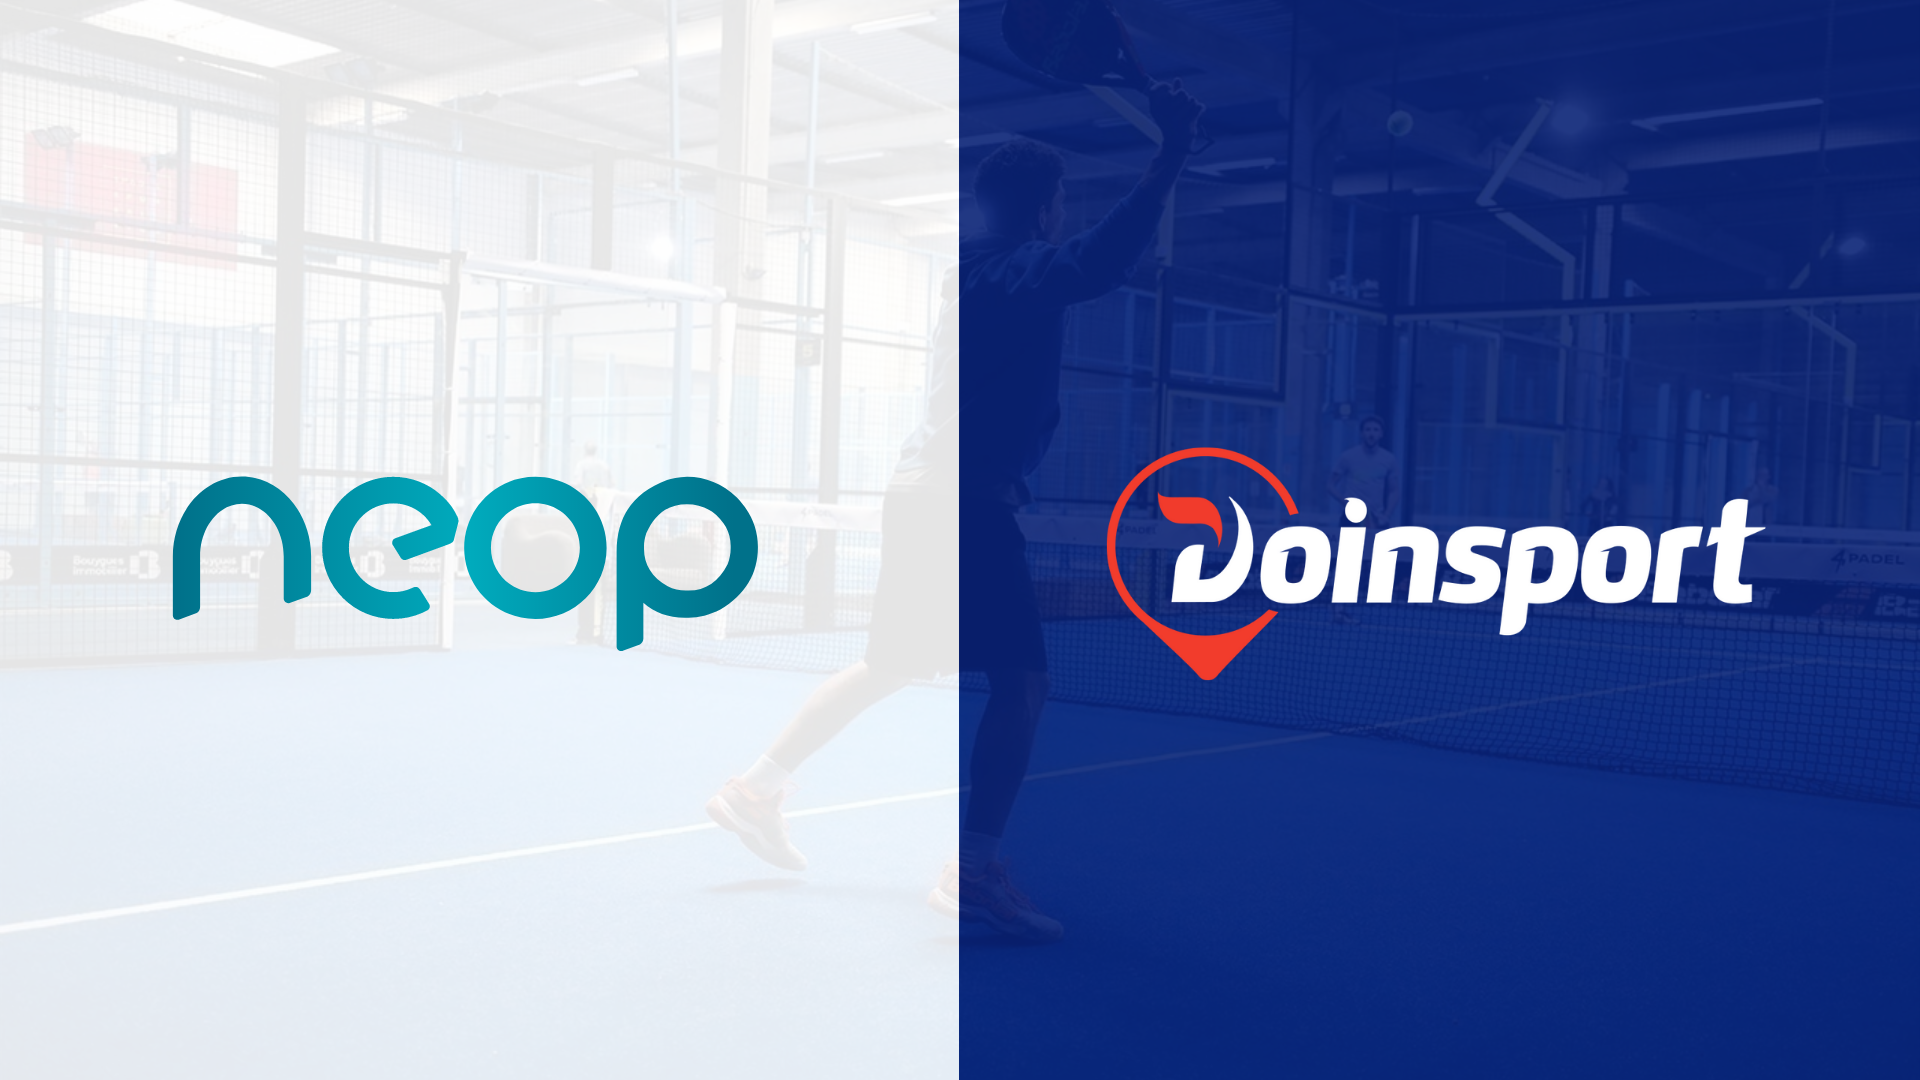 Digitize your club with the Doinsport - Neop partnership